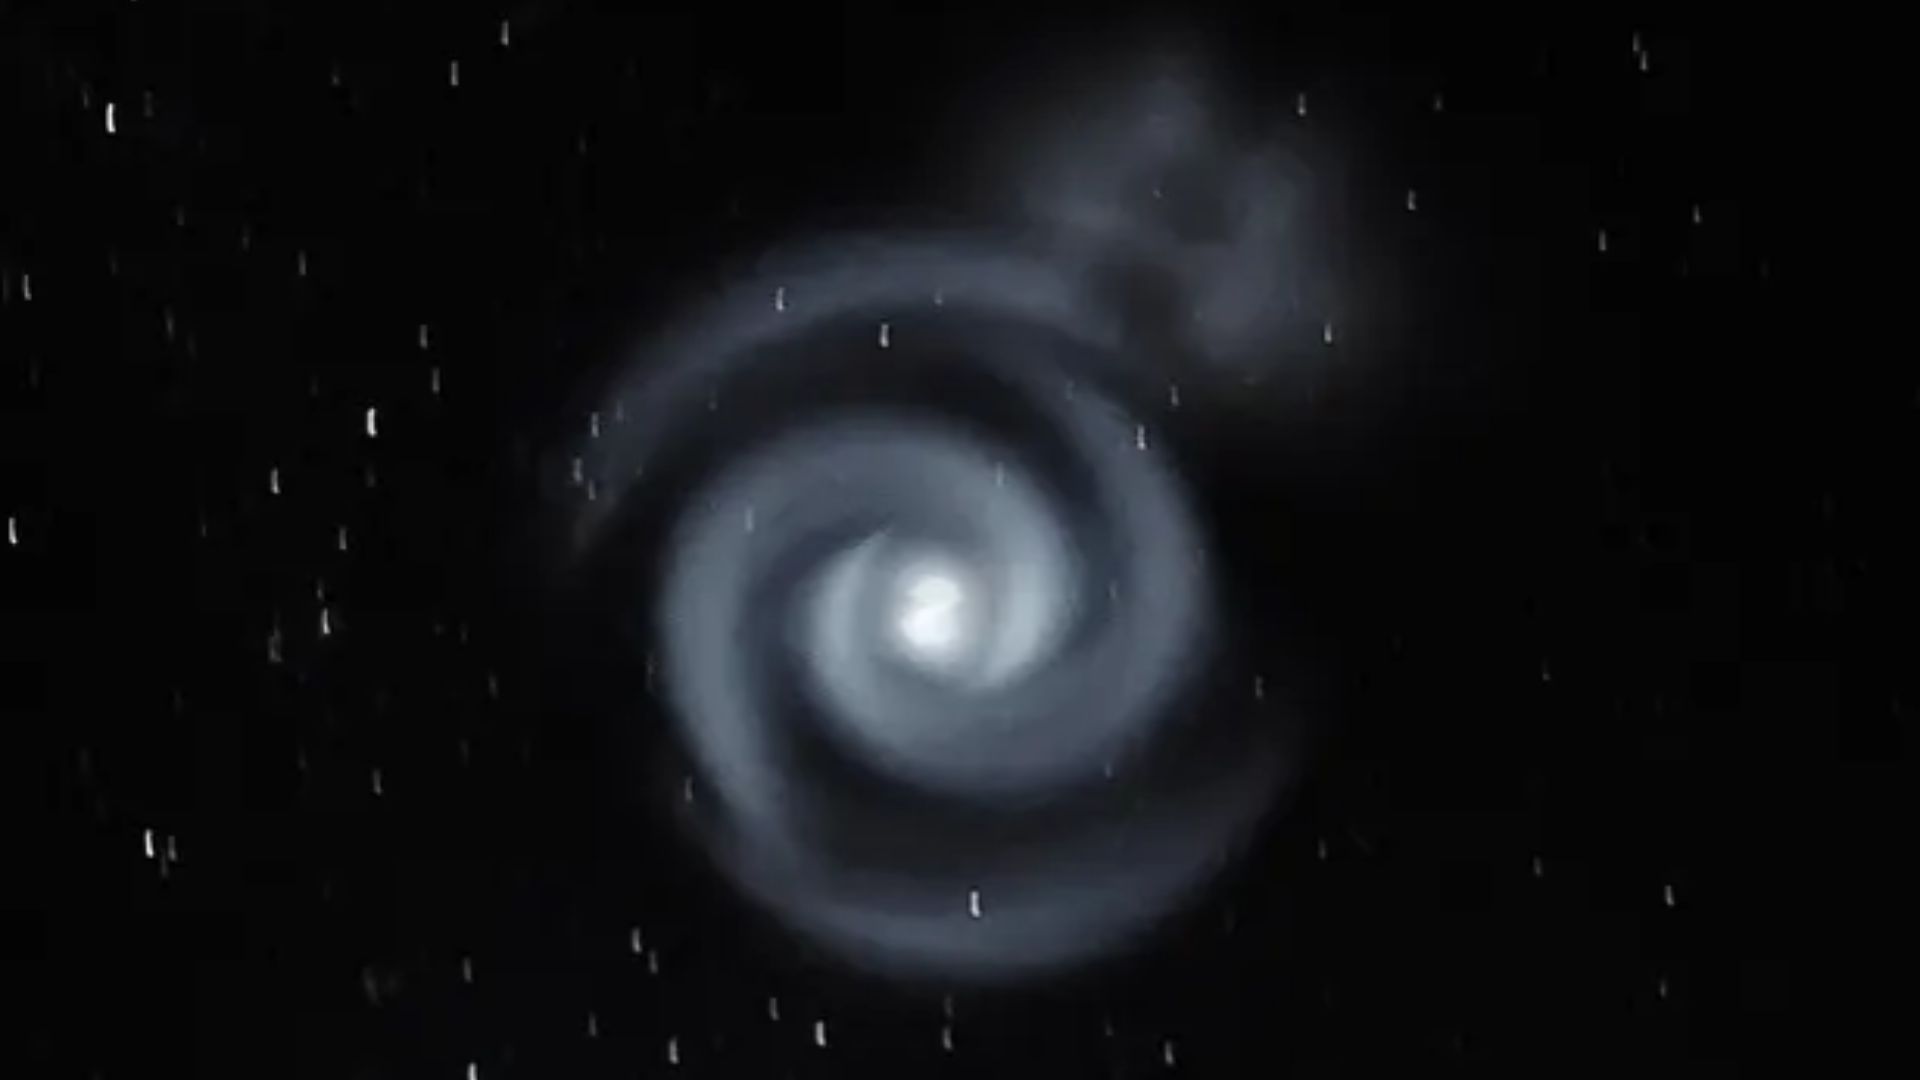 Spirals of blue light in New Zealand night sky leave stargazers going nuts